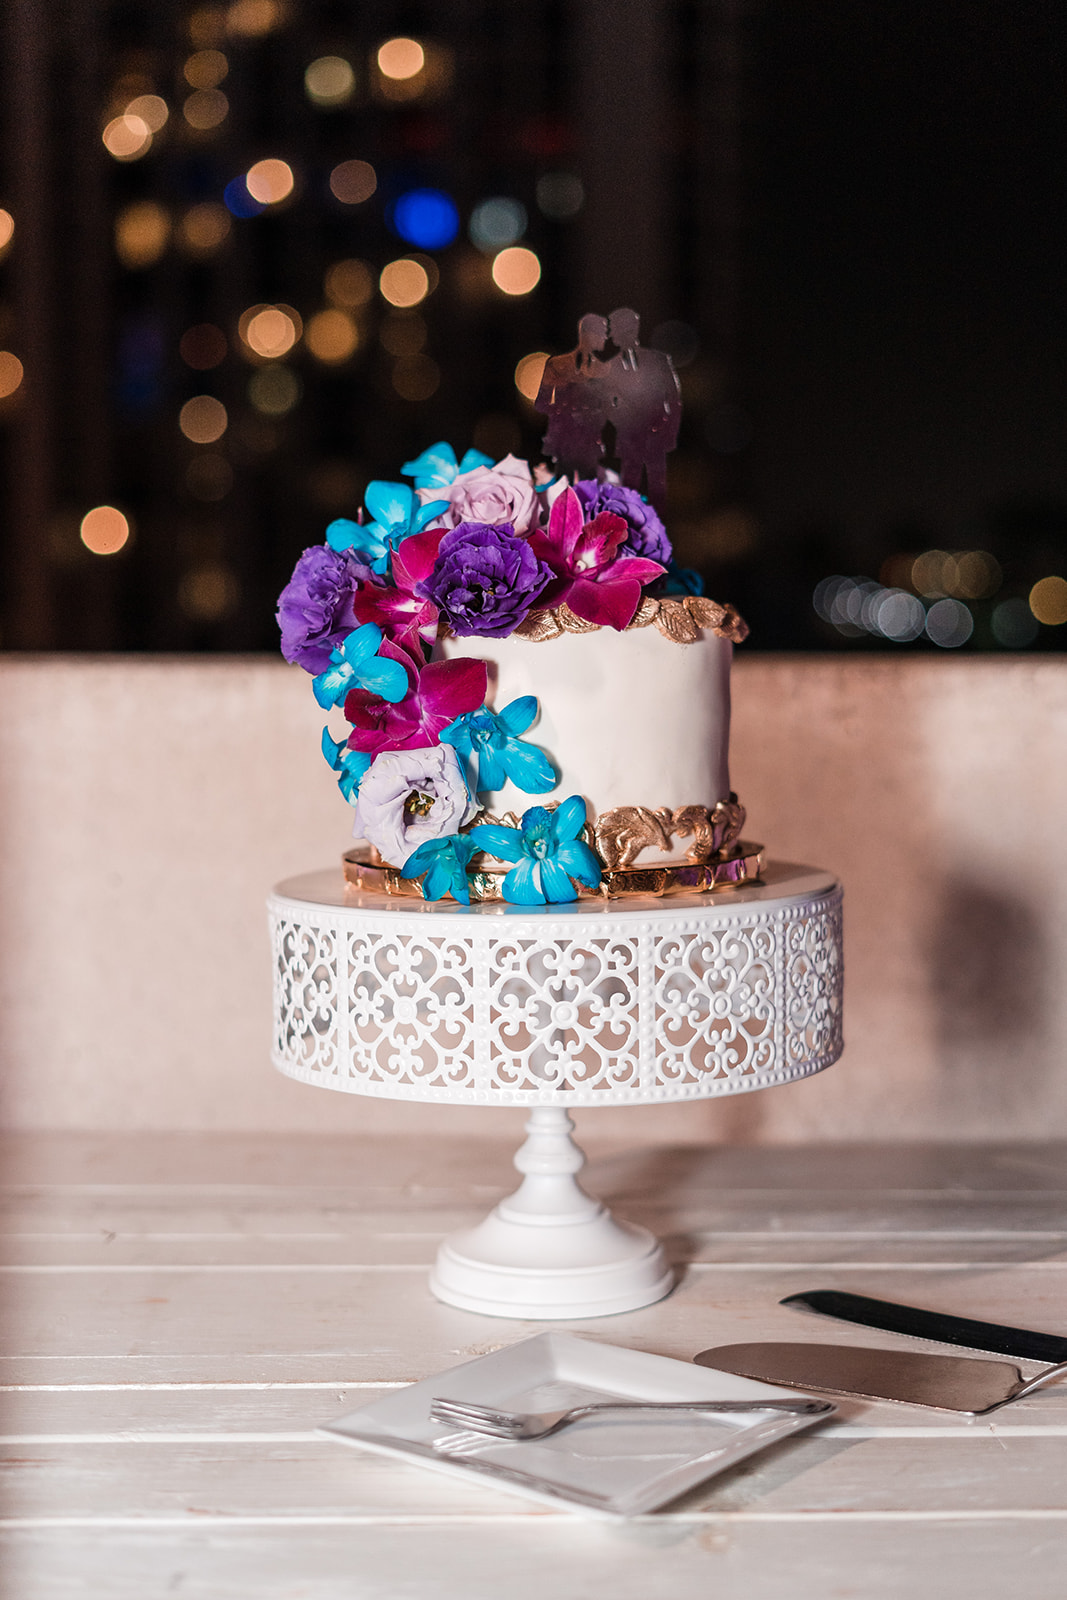 A modern wedding cake adorned with beautiful edible flowers, featuring a miniature figurine of the grooms on the top tier.